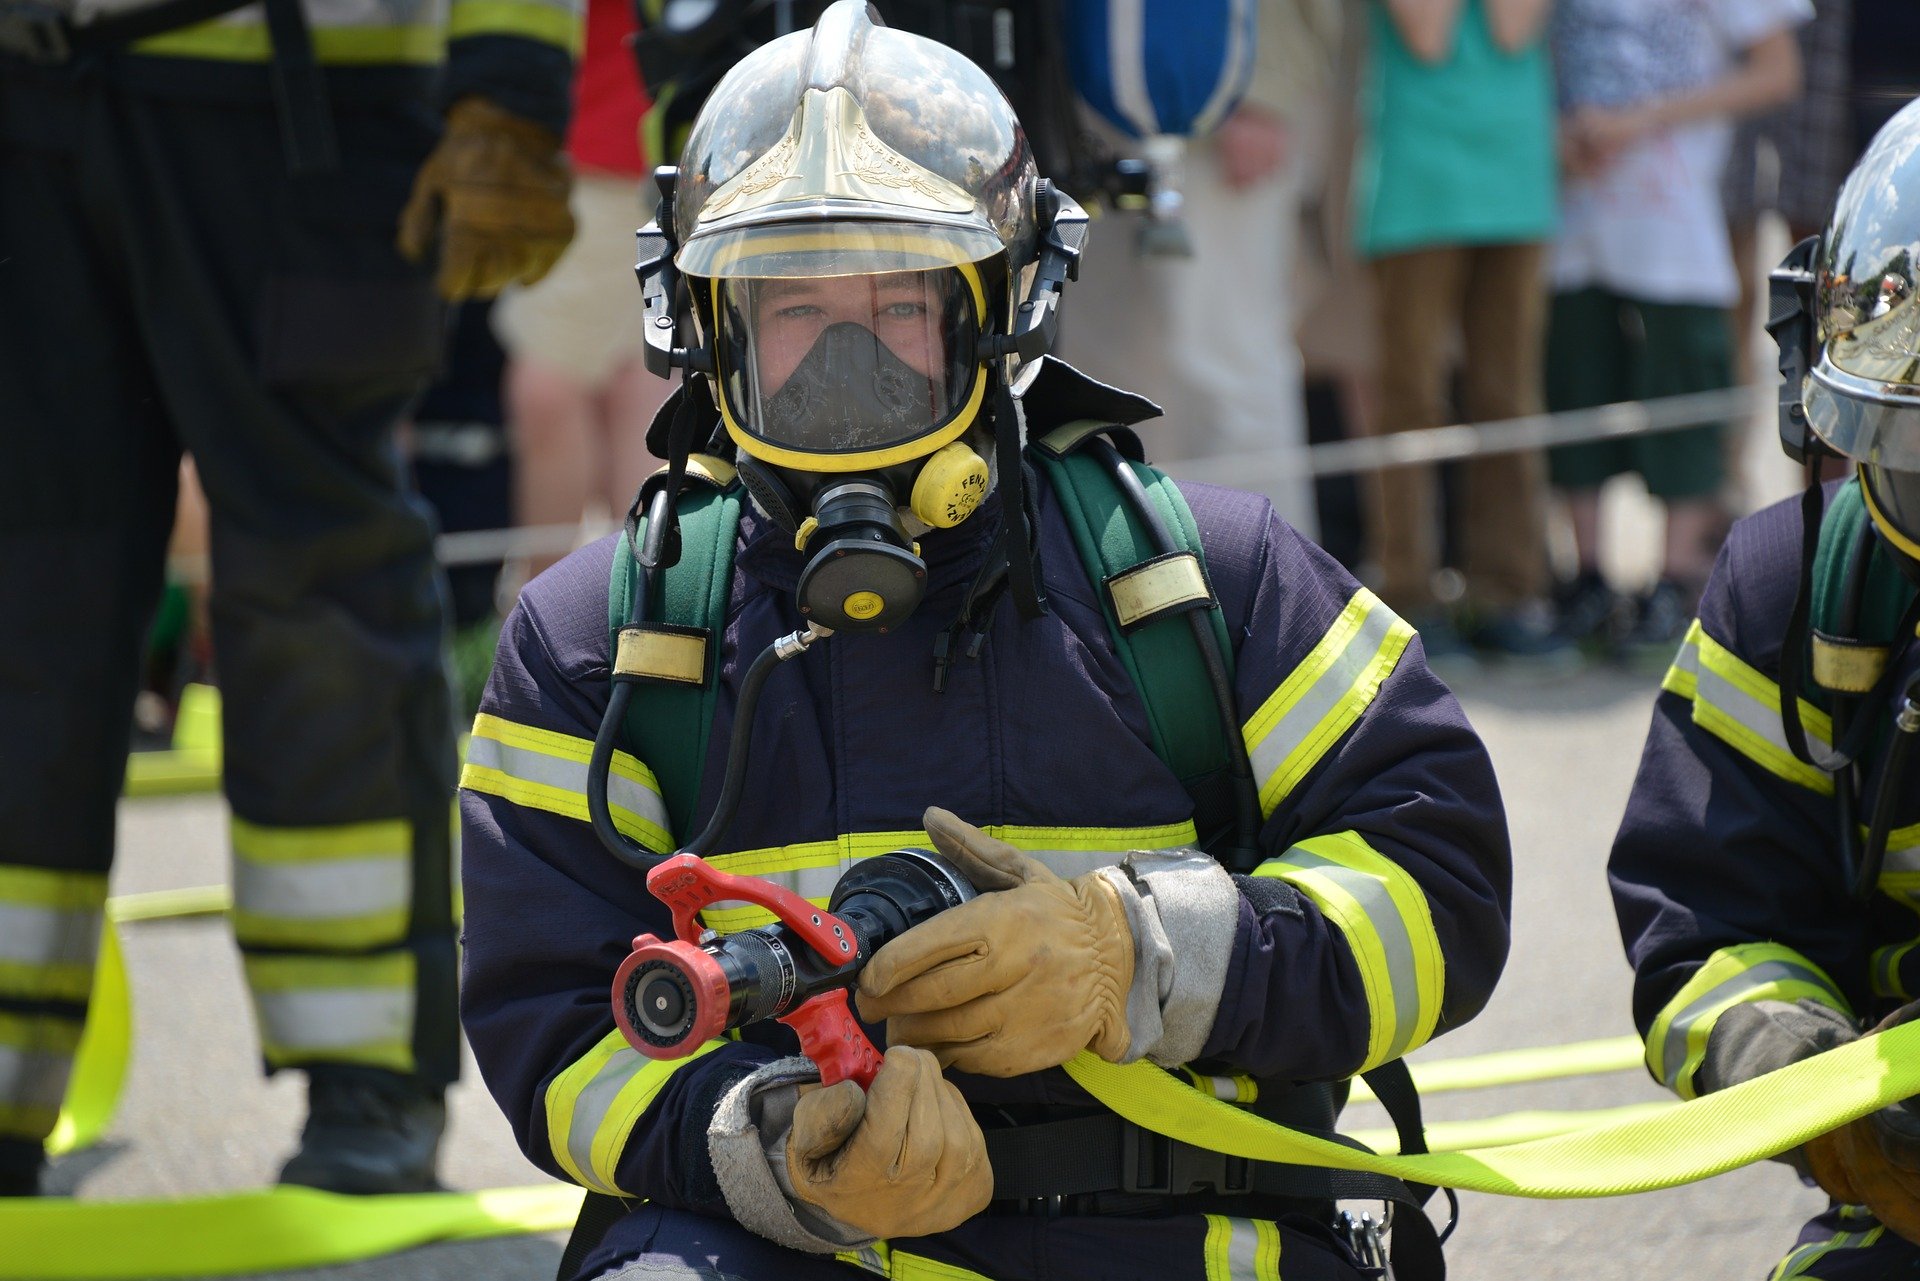 A firefighter wearing respiratory protection | Source: Pixabay